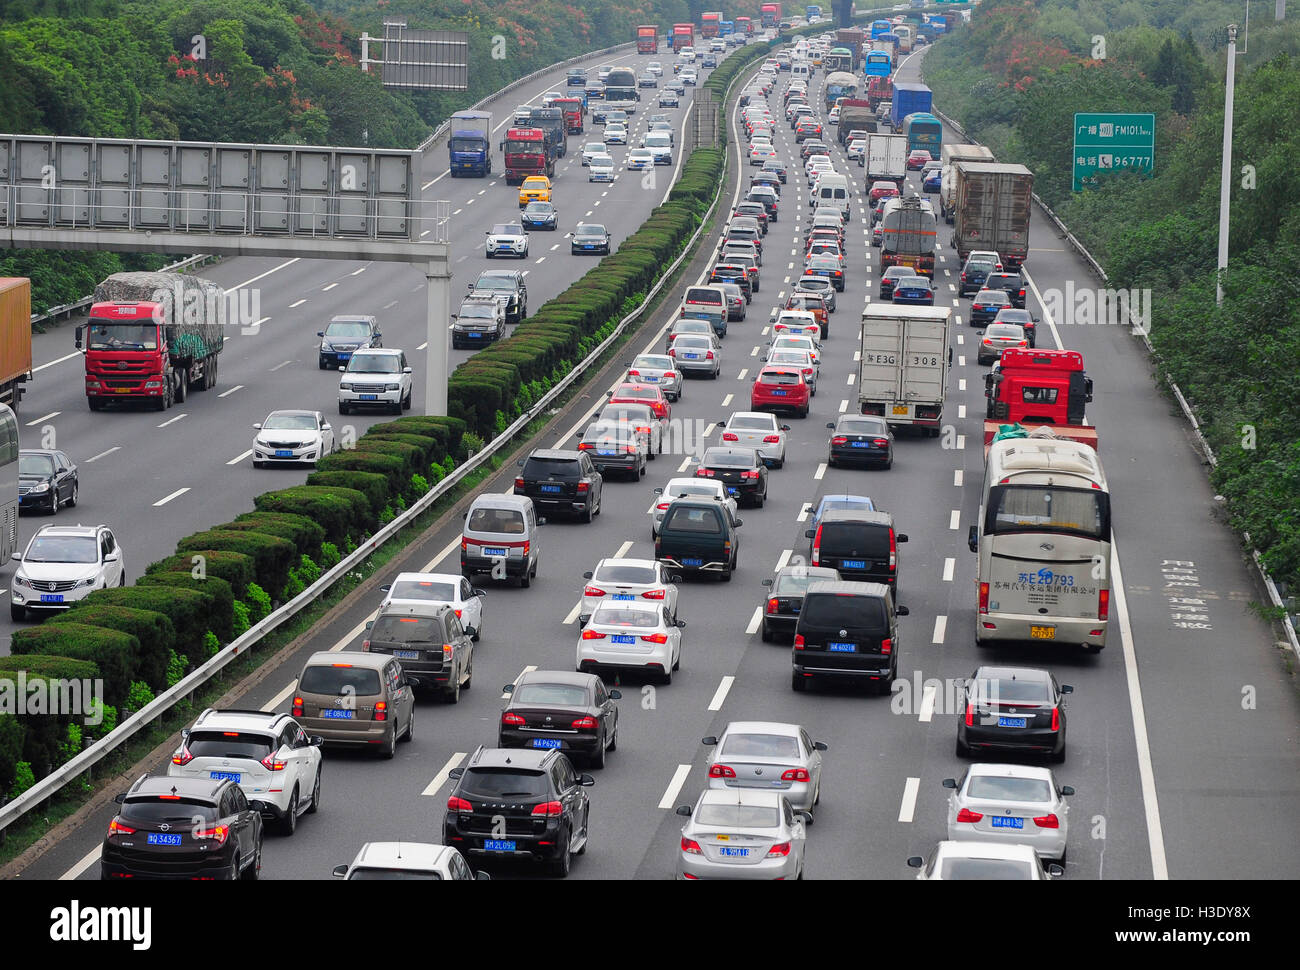 (161007) -- WUXI, Oct. 7, 2016 (Xinhua) -- Vehicles run on a highway at the Wuxi section in east China's Jiangsu Province, Oct. 6, 2016. The country witnessed a travel peak on the last two days of the week-long National Day holiday as people started to return to school and work. (Xinhua/Huan Yueliang) (ry) Stock Photo